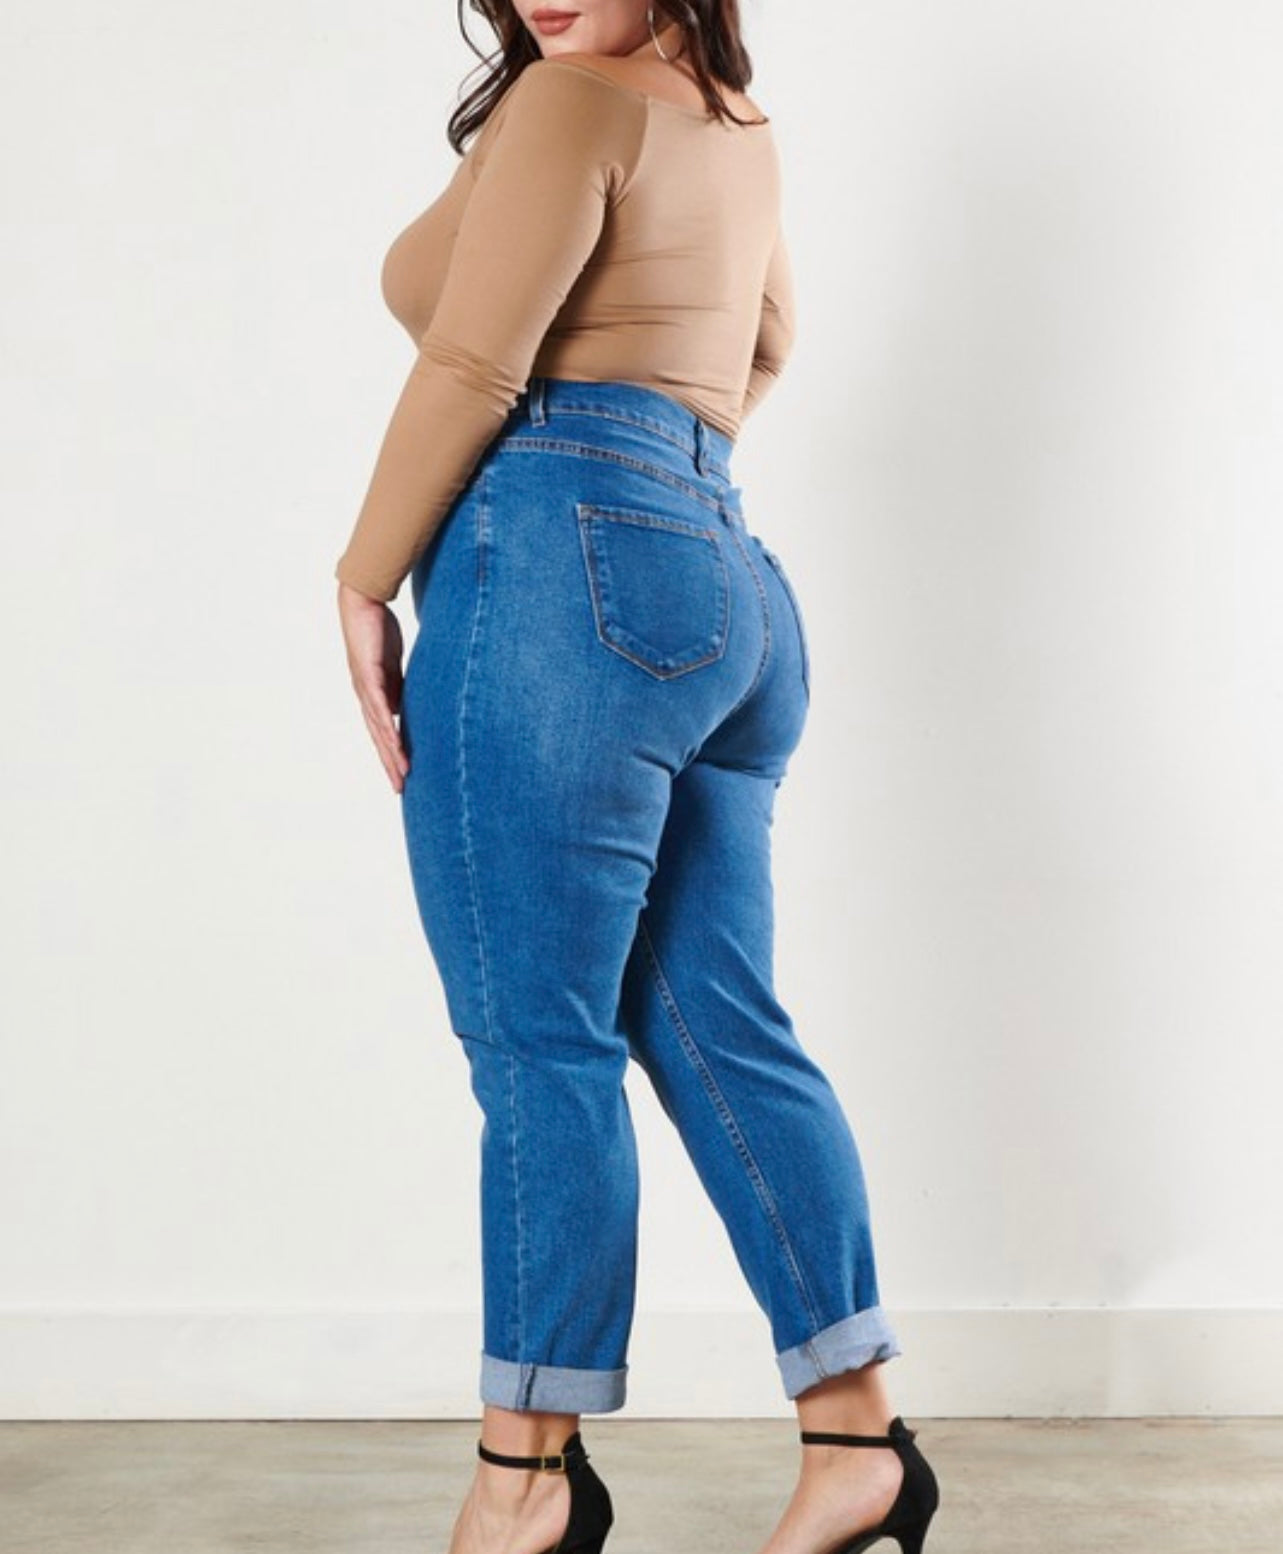 Curvy model wearing Classic High waisted angle jeans while looking over left shoulder